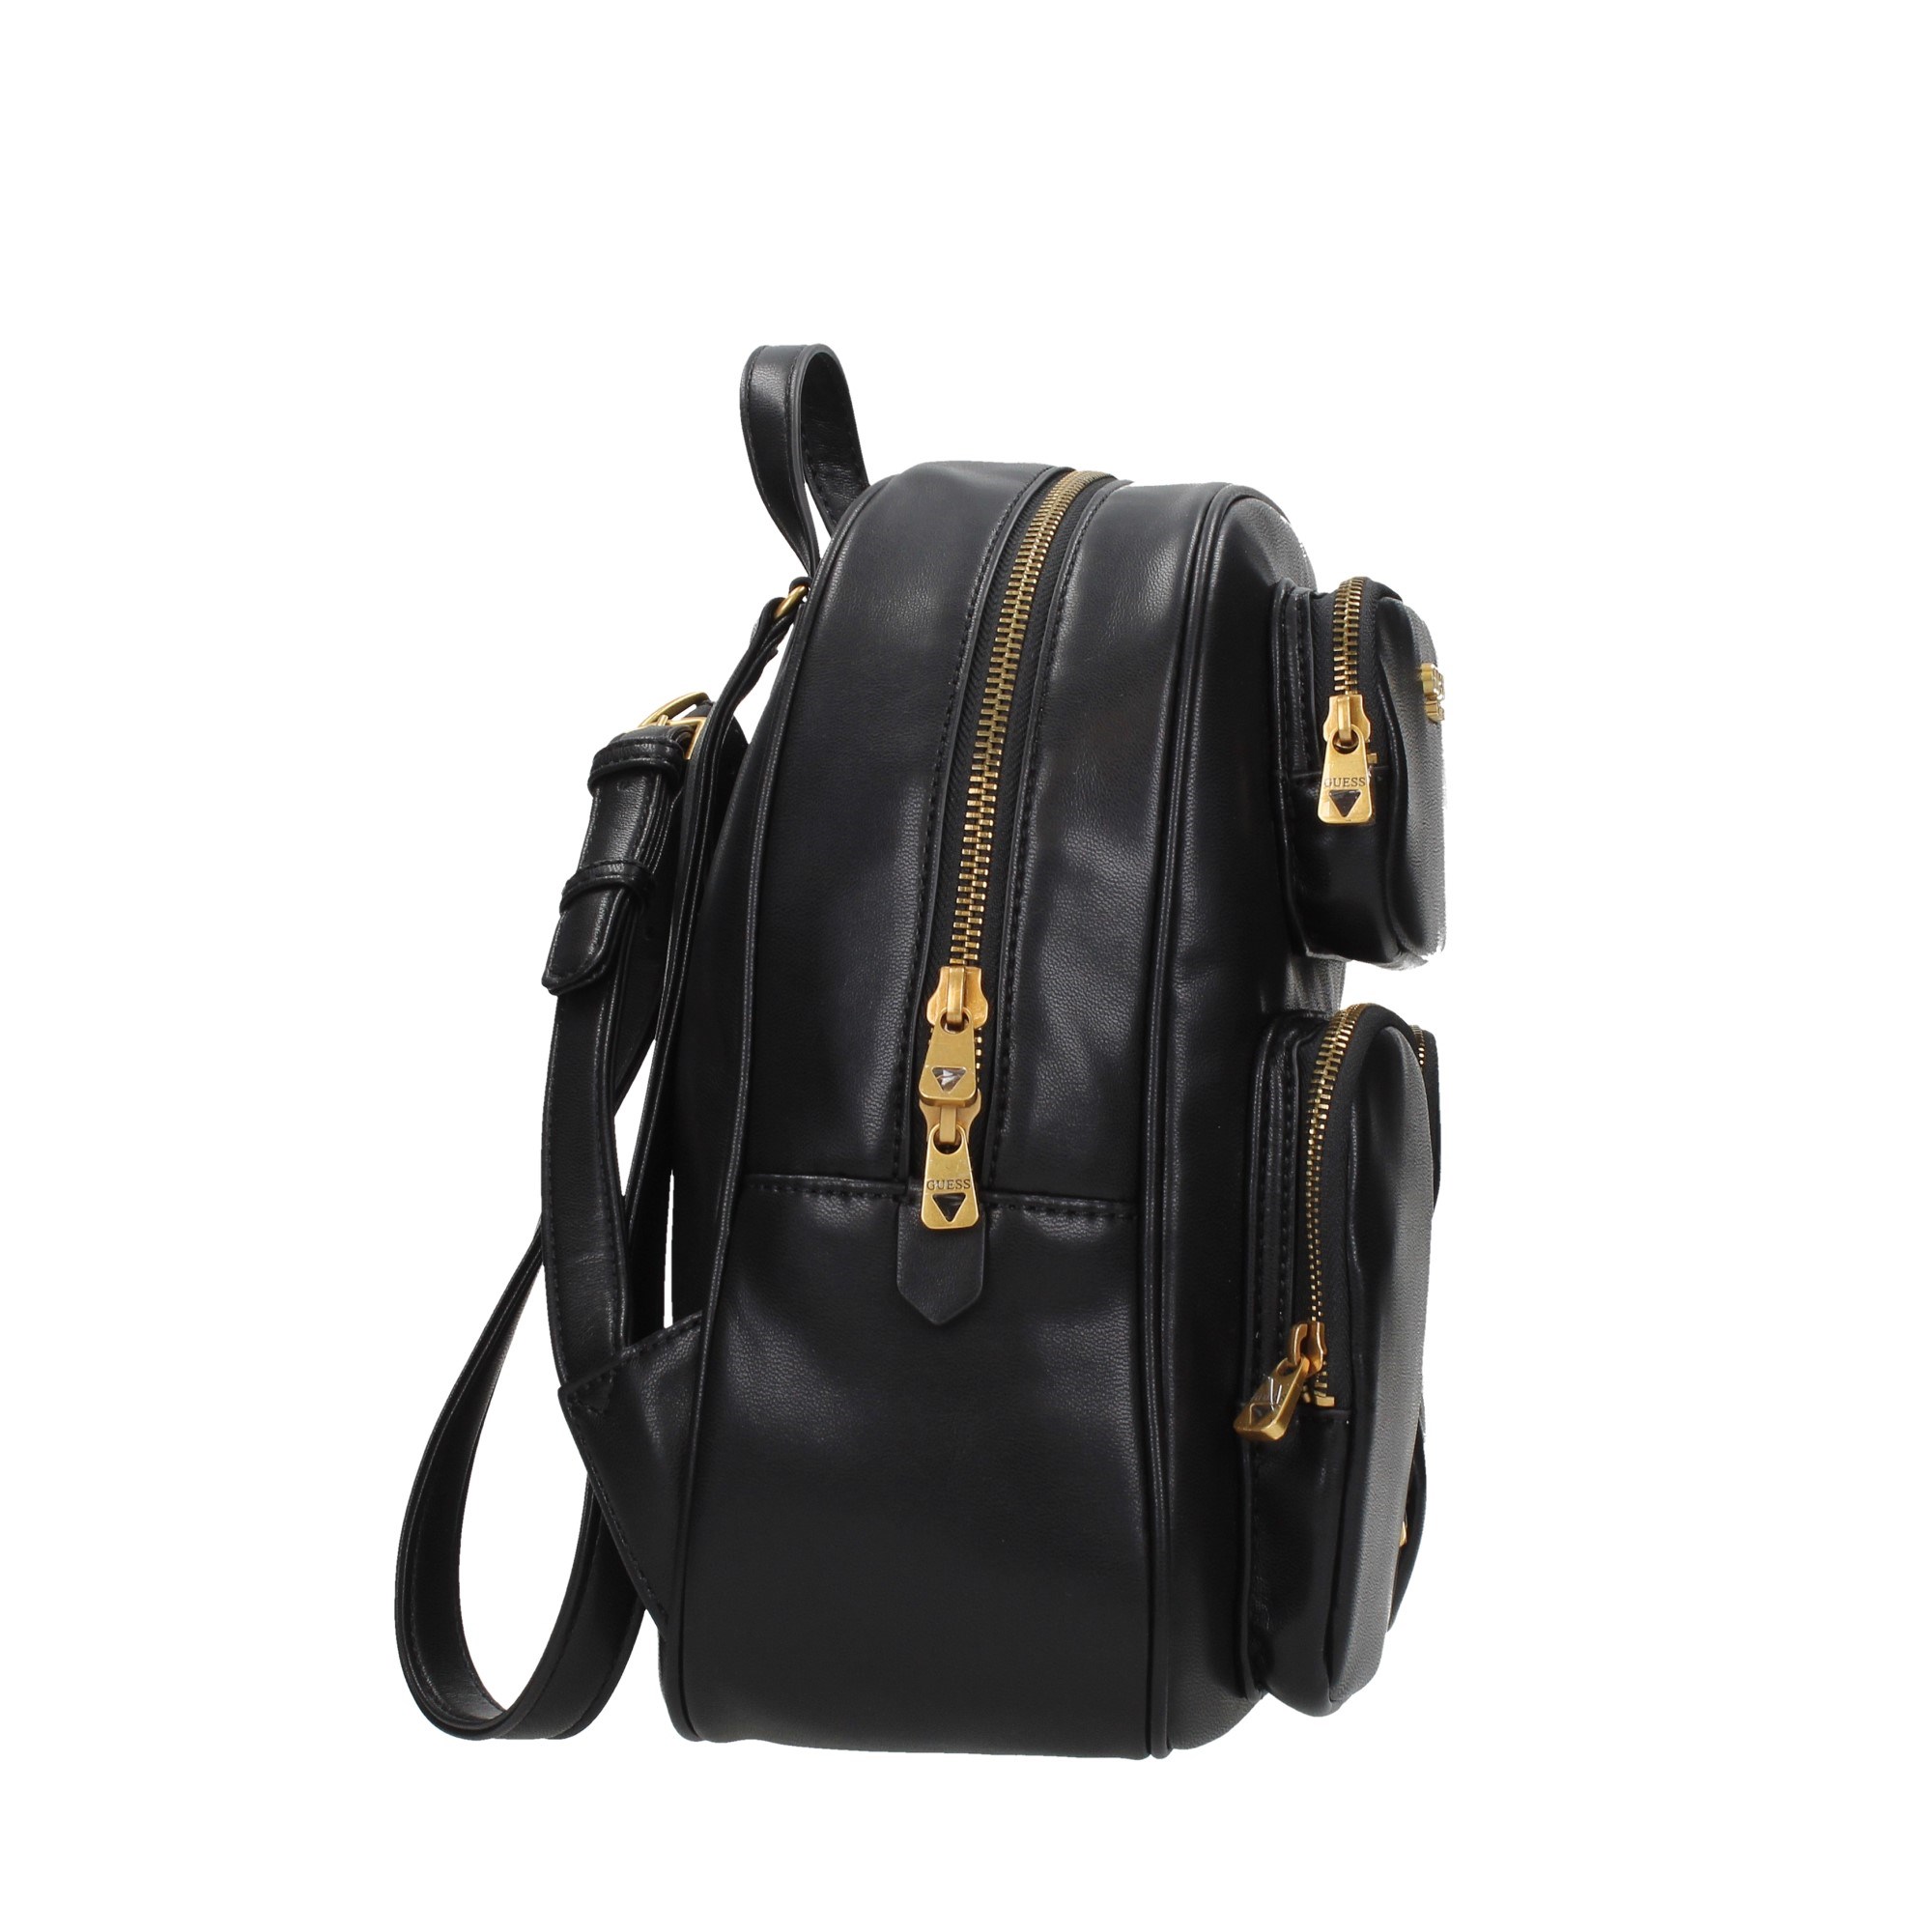 Guess Borse Accessories Women Backpack HWVB85/54320